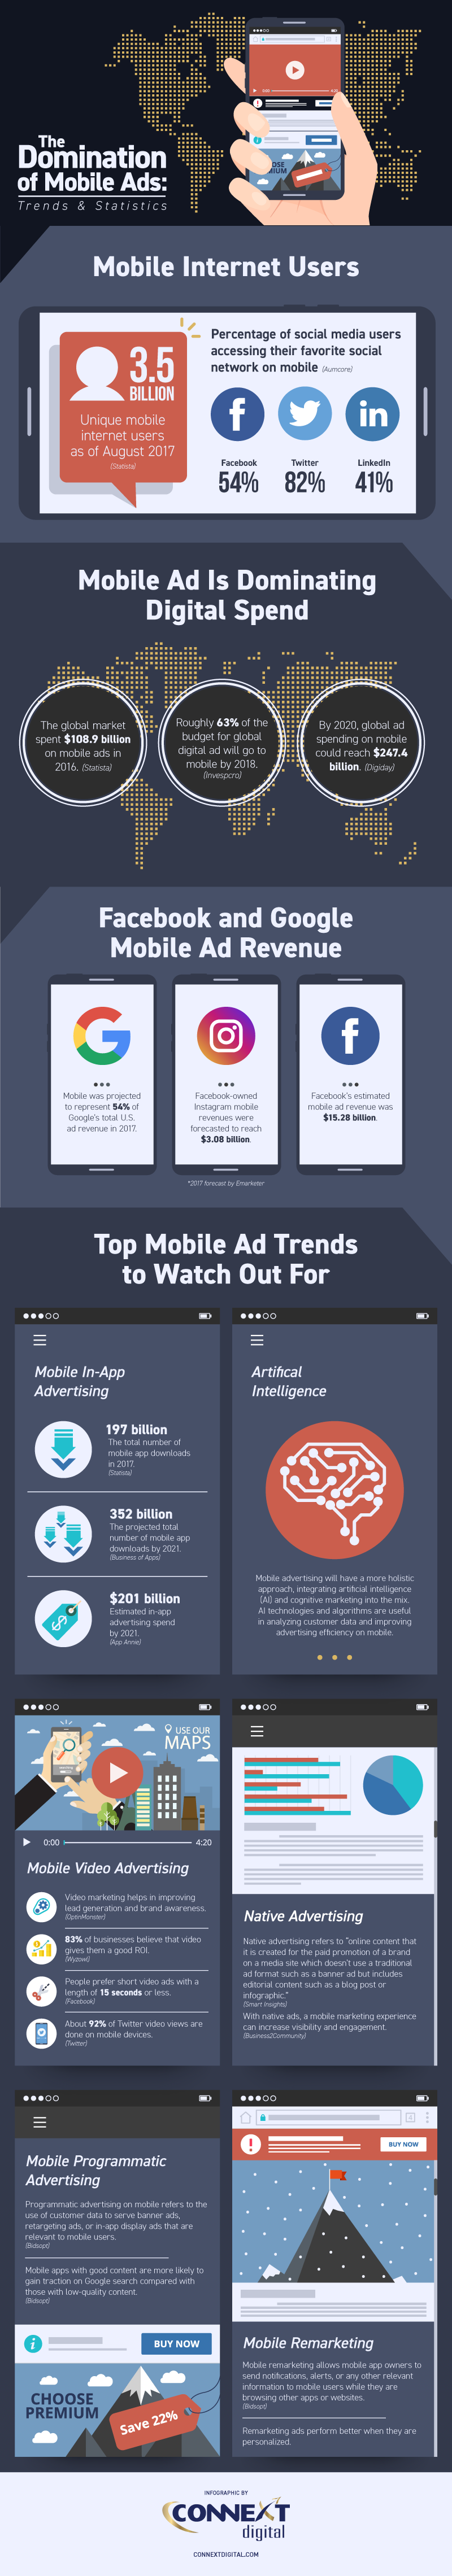 The Domination of Mobile Ads: Statistics and Trends